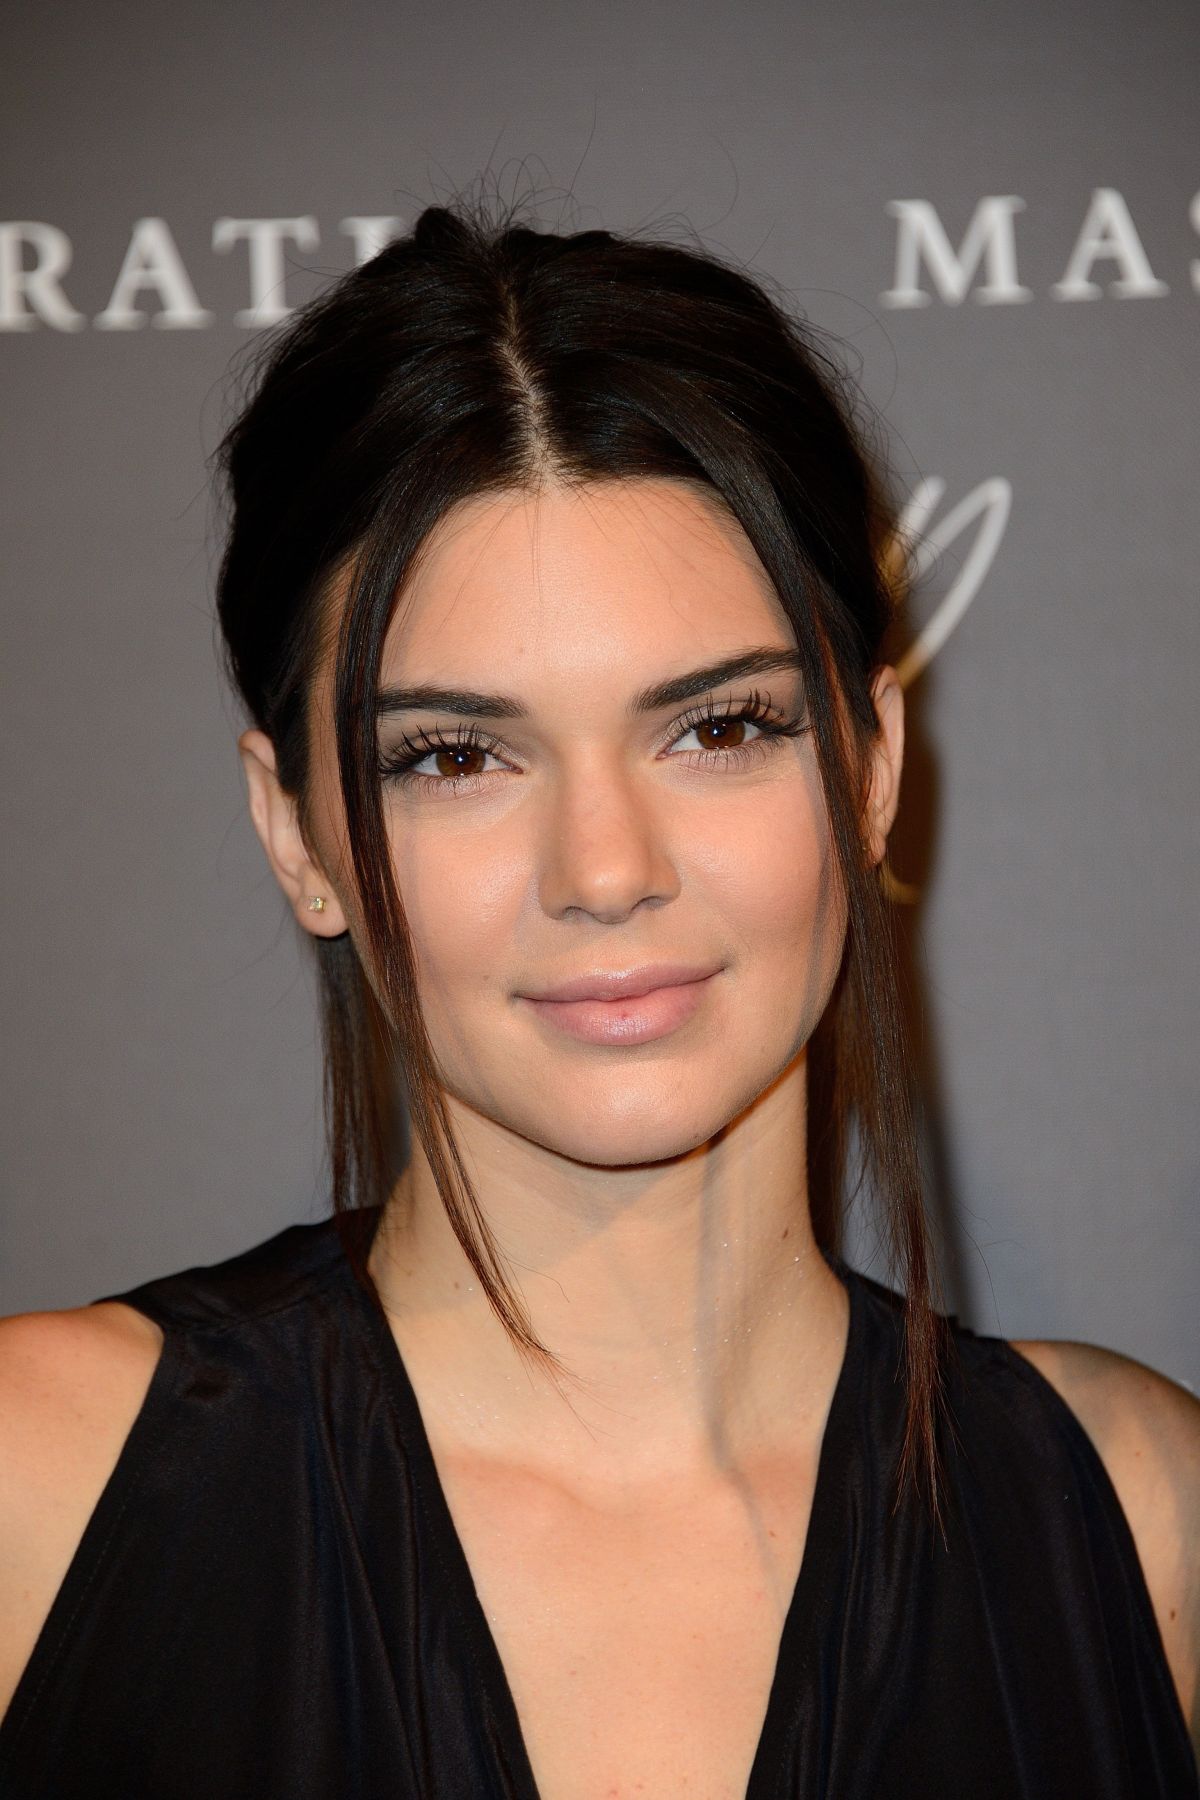 KENDALL JENNER at CR Fashion Book Issue #5 Launch Party in Paris